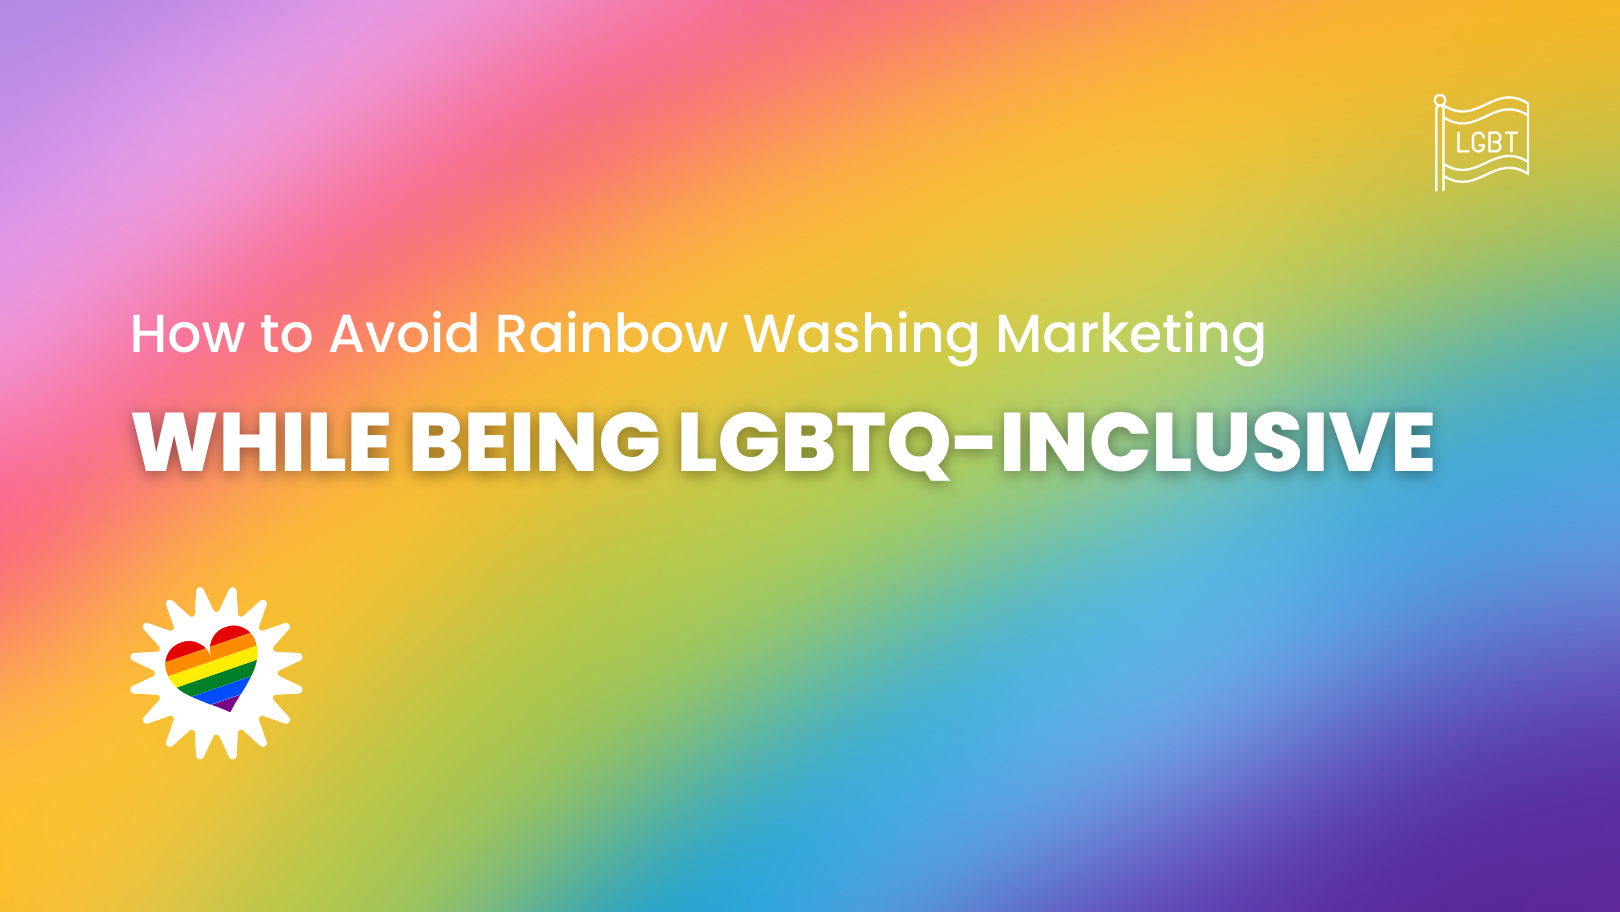 VS_how-to-avoid-rainbow-washing-marketing-while-being-lgbtq-inclusive